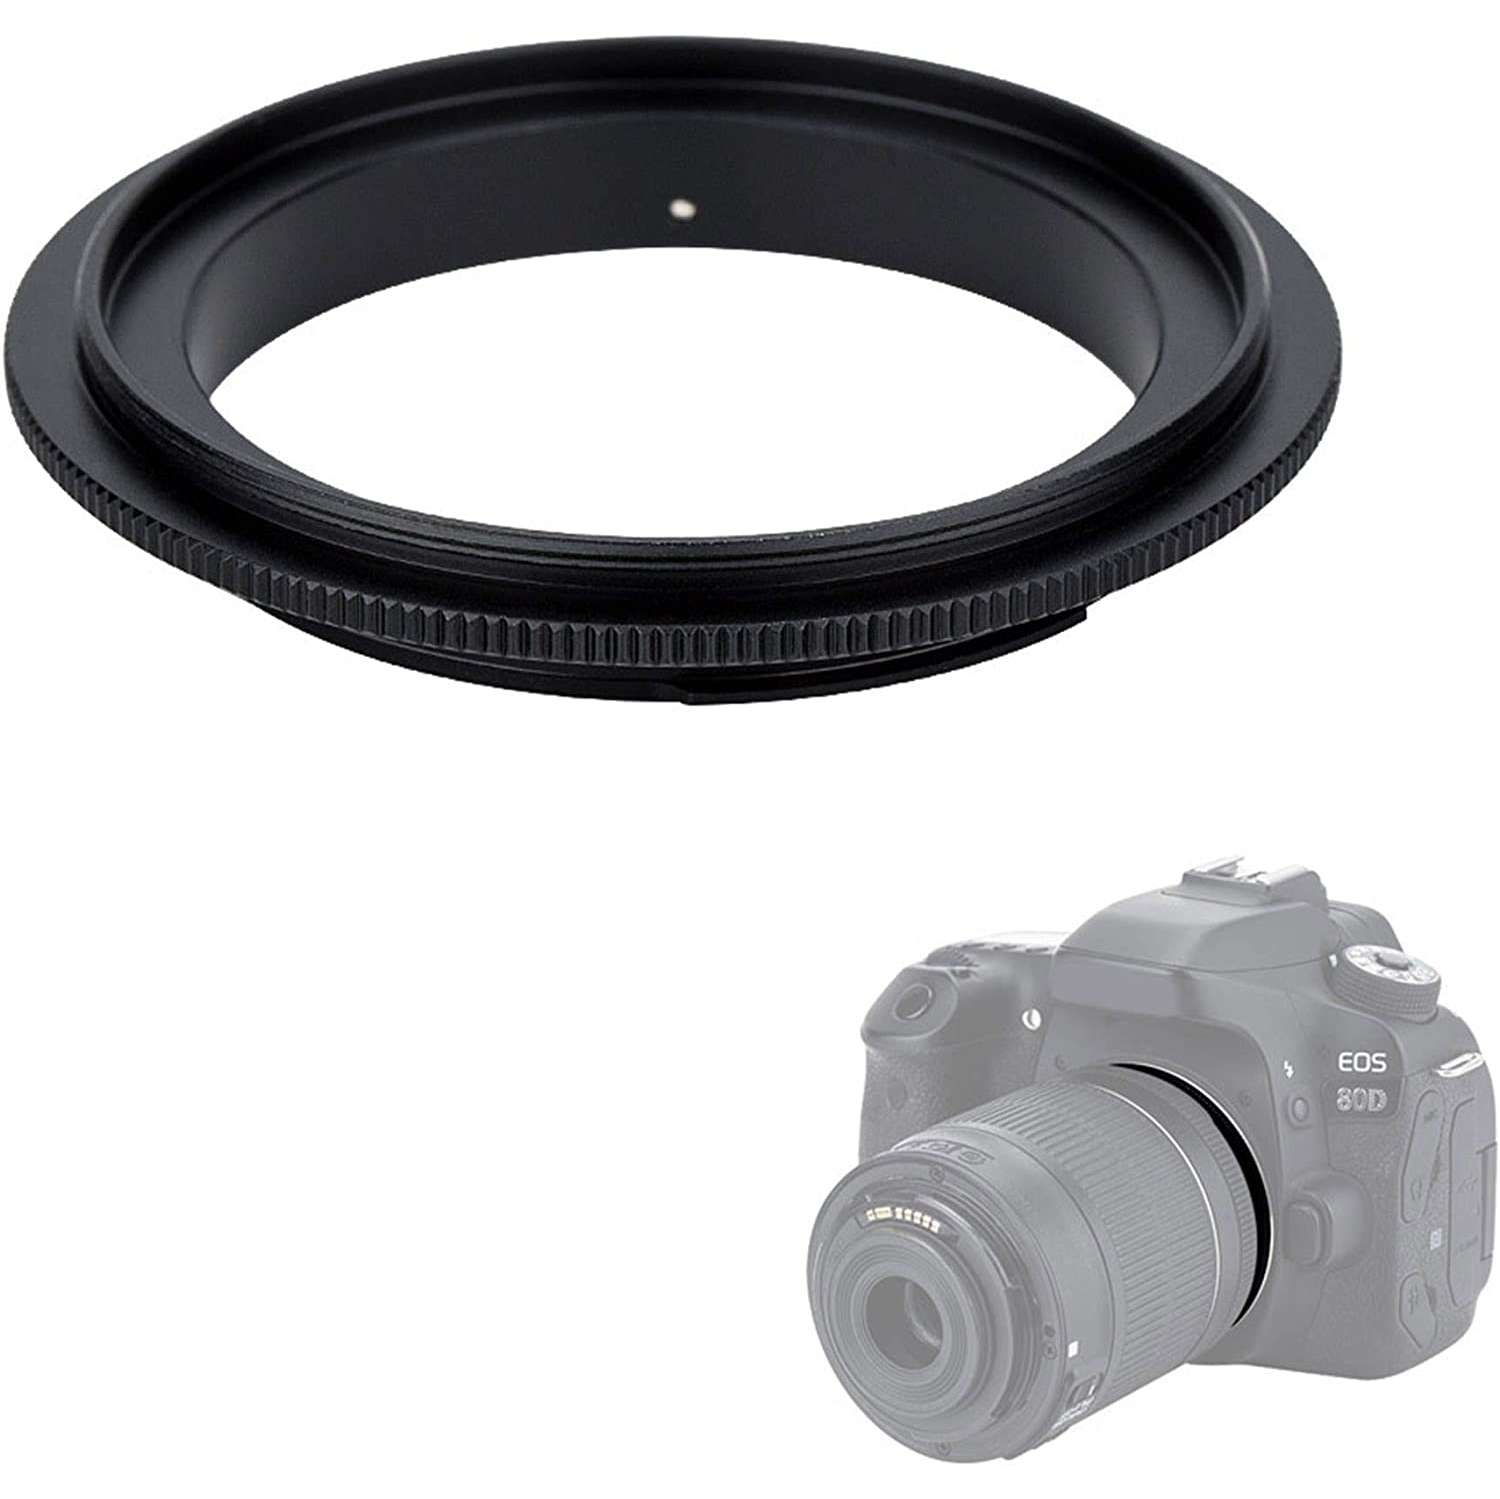 58mm Macro Lens Reverse Ring Adapter for Canon EOS Rebel T6 T7 T5 SL3 SL2 T8i T7i T6i T6s T5i 2000D 4000D 90D 80D 70D with EF-S 18-55mm Kit Lens & More Canon DSLR Cameras with 58mm